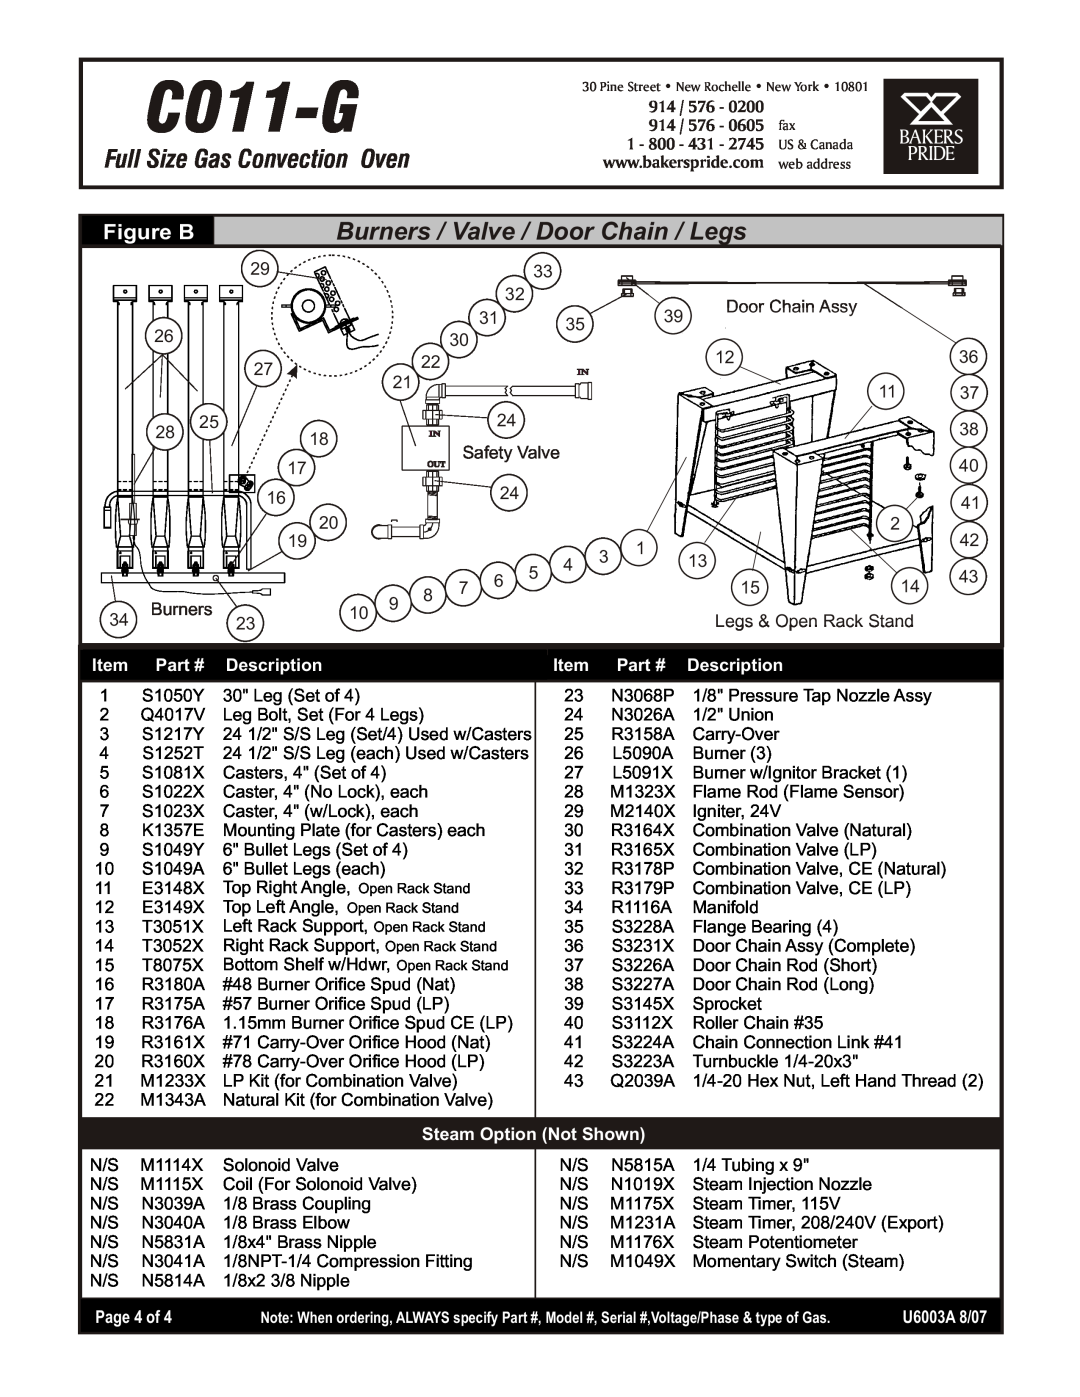 Bakers Pride Oven CO11-G Figure B, 914, Door Chain Assy, Safety Valve, Burners, Legs & Open Rack Stand, Page 4 of, Oven 